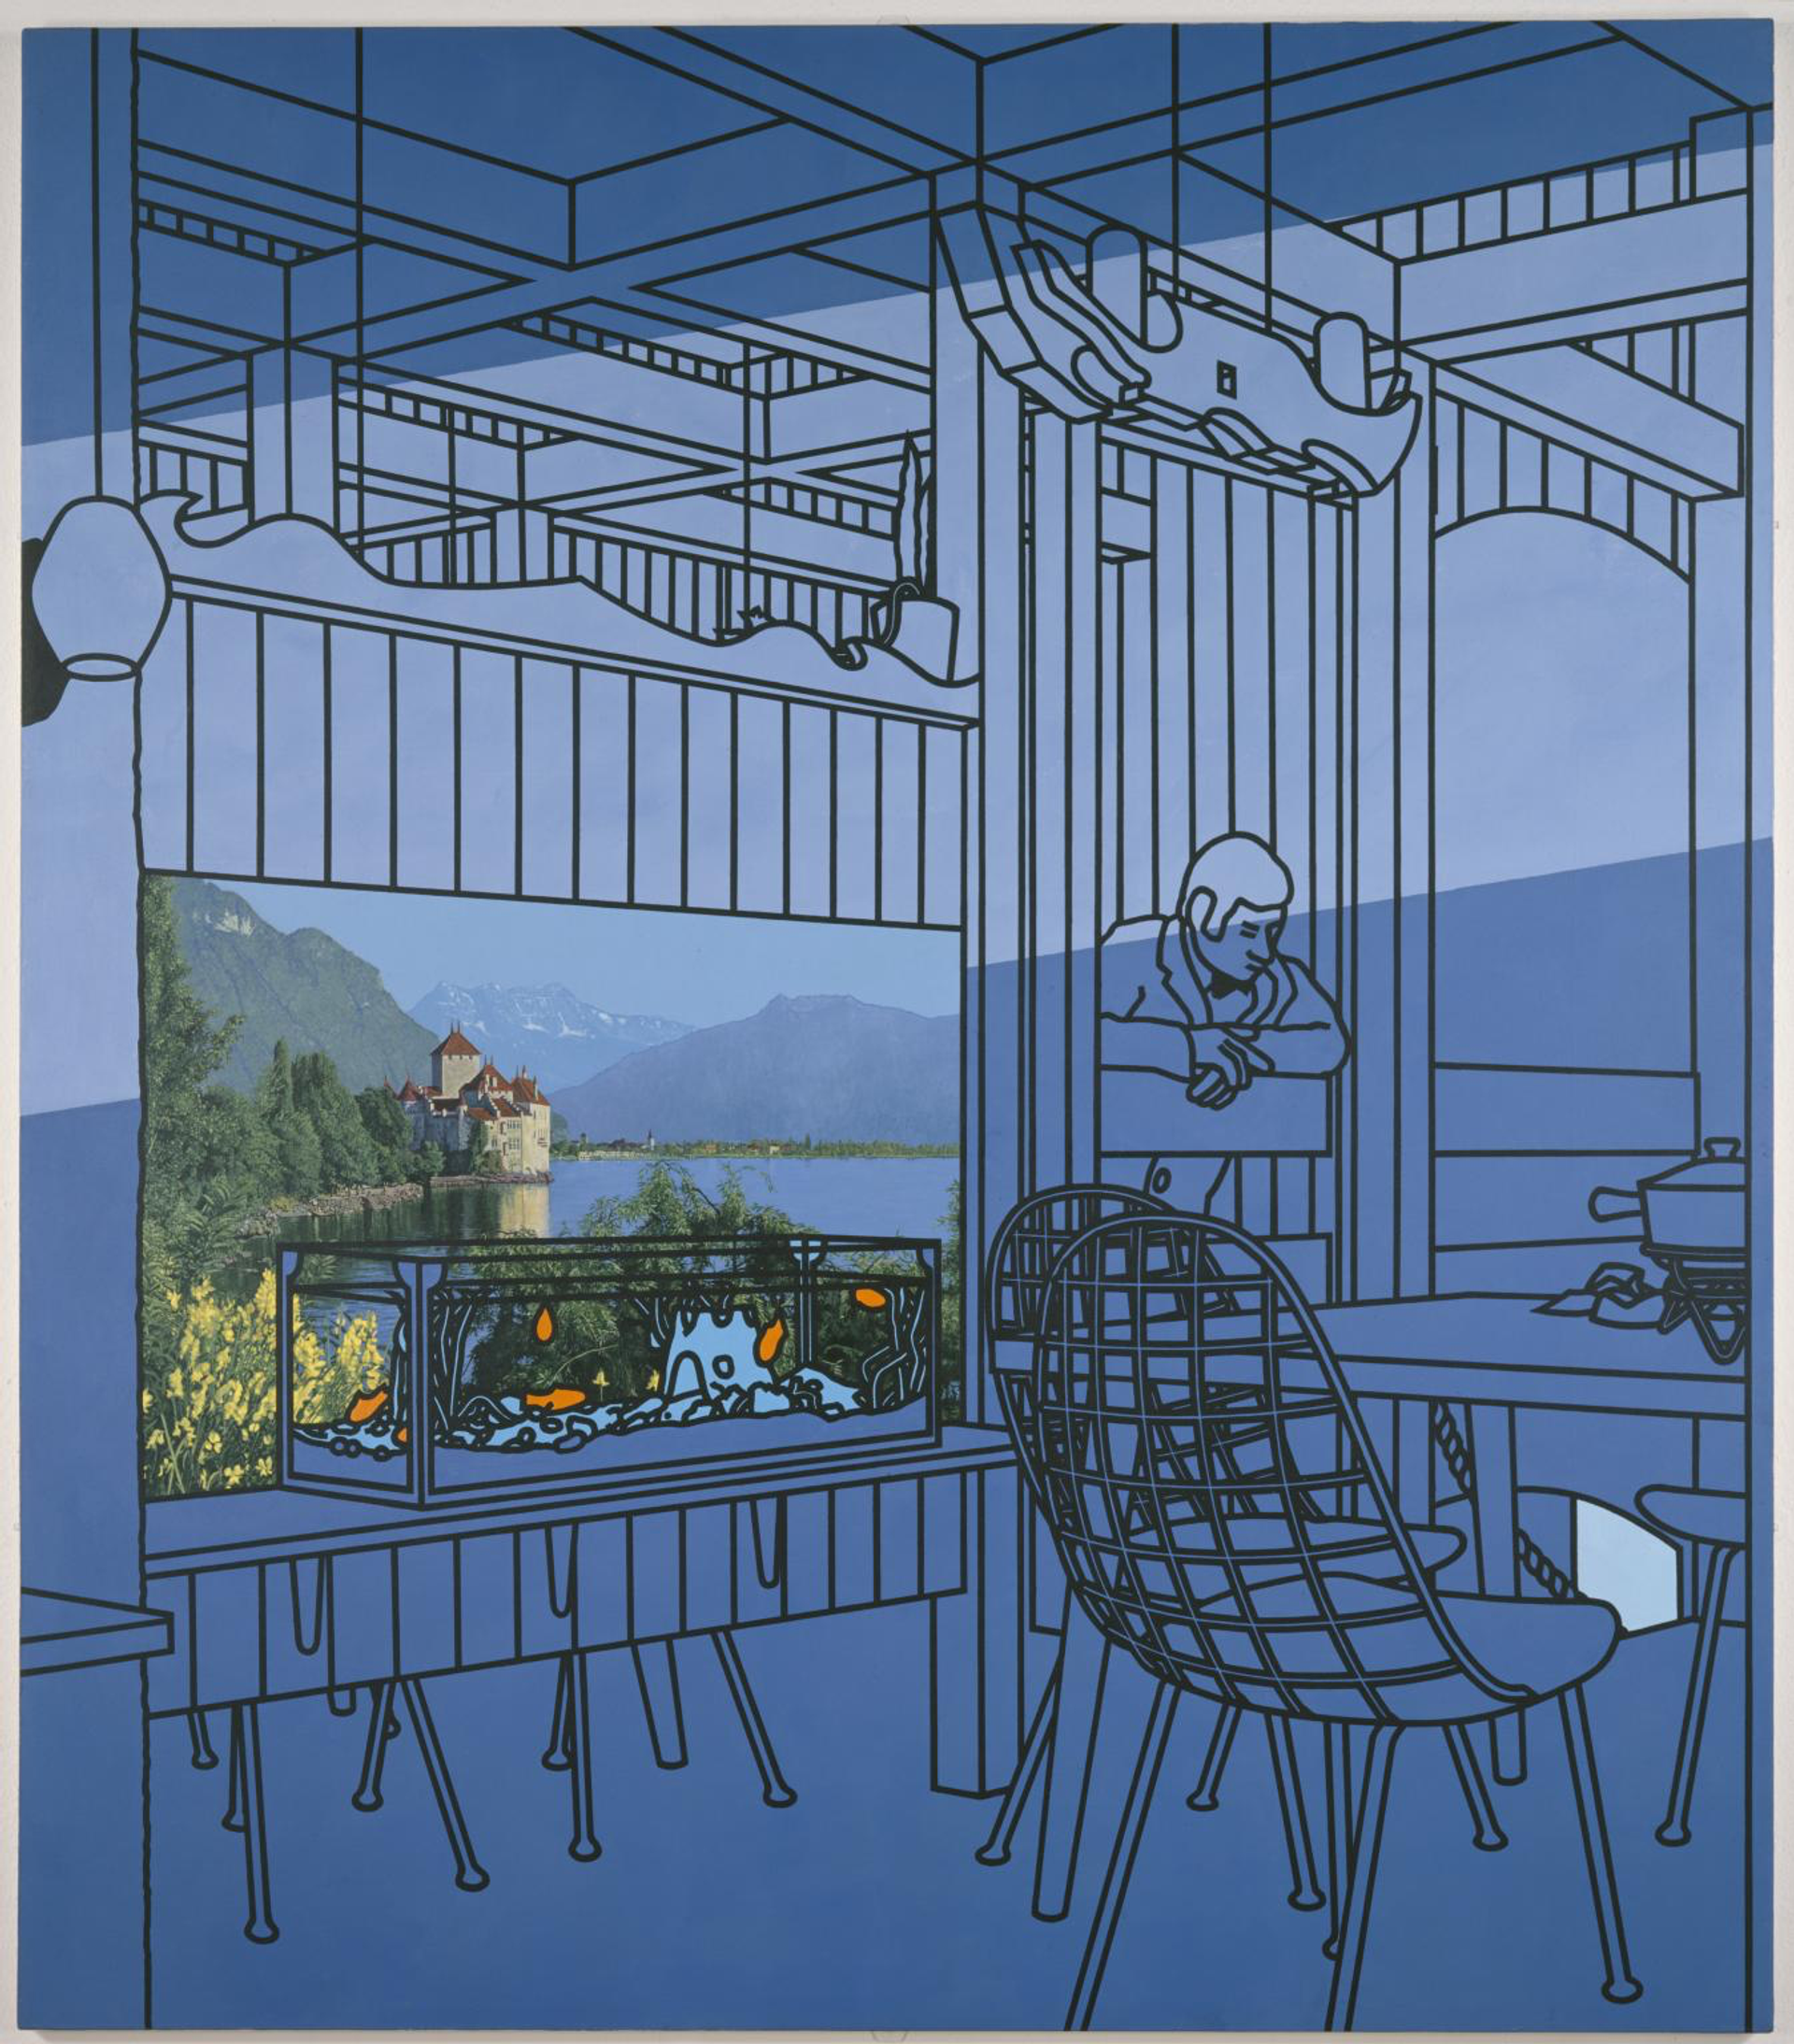 Photomural depicting a European town on a hill displayed in a restaurant, featuring a fish tank, unoccupied table and chairs, and a solitary waiter leaning in an alcove, all superimposed against an abstracted blue backdrop.